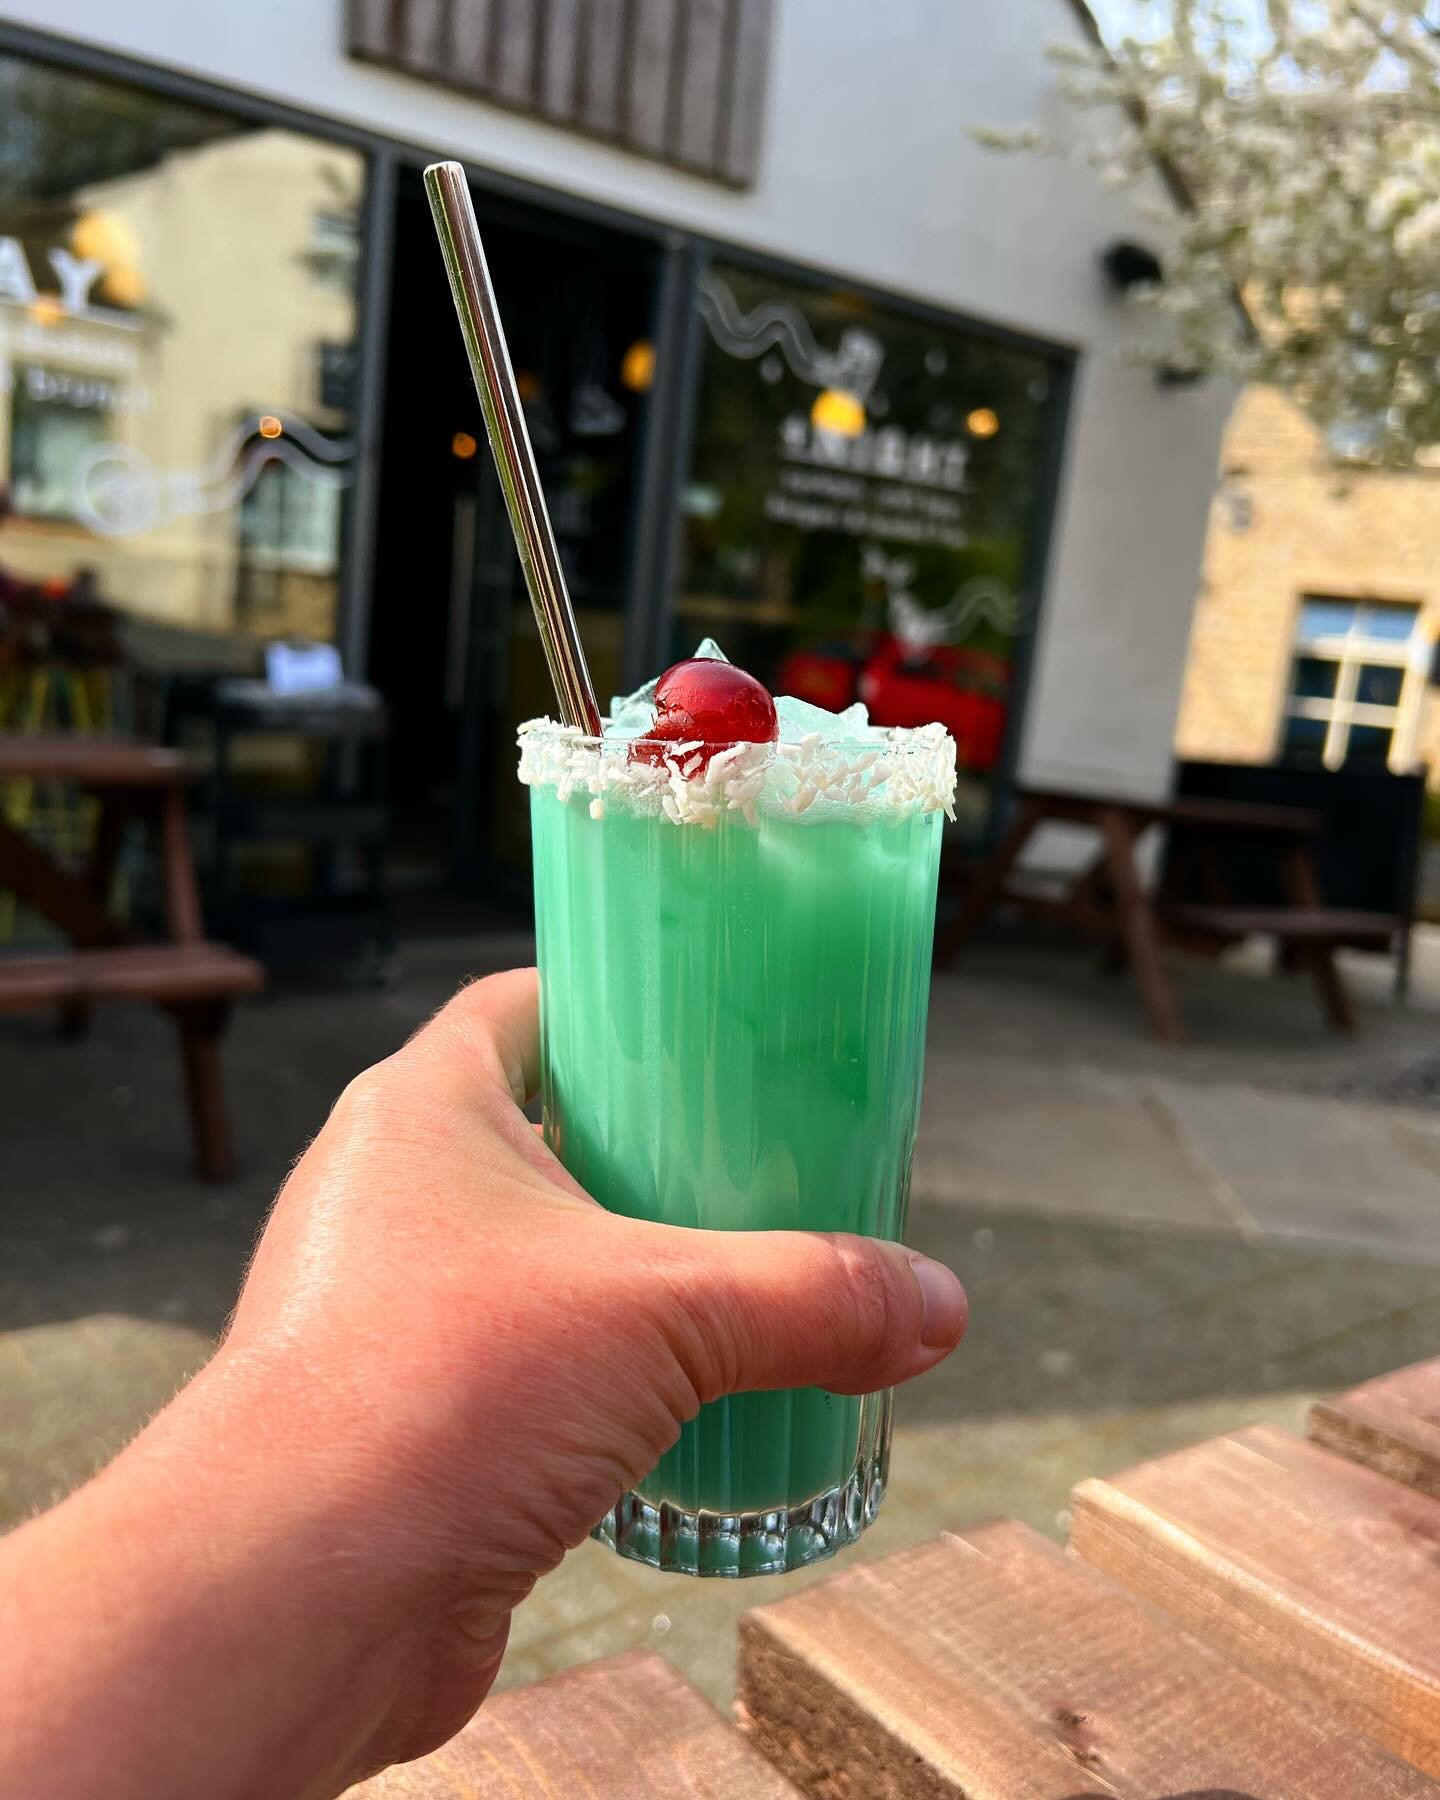 💙As if we haven&rsquo;t told you about our New Cocktail Menu yet?! Well it&rsquo;s the perfect day to come down and try one out, the sun&rsquo;s got his hat on and if he&rsquo;s not behind a cloud it&rsquo;s almost warm enough to take your coat off 